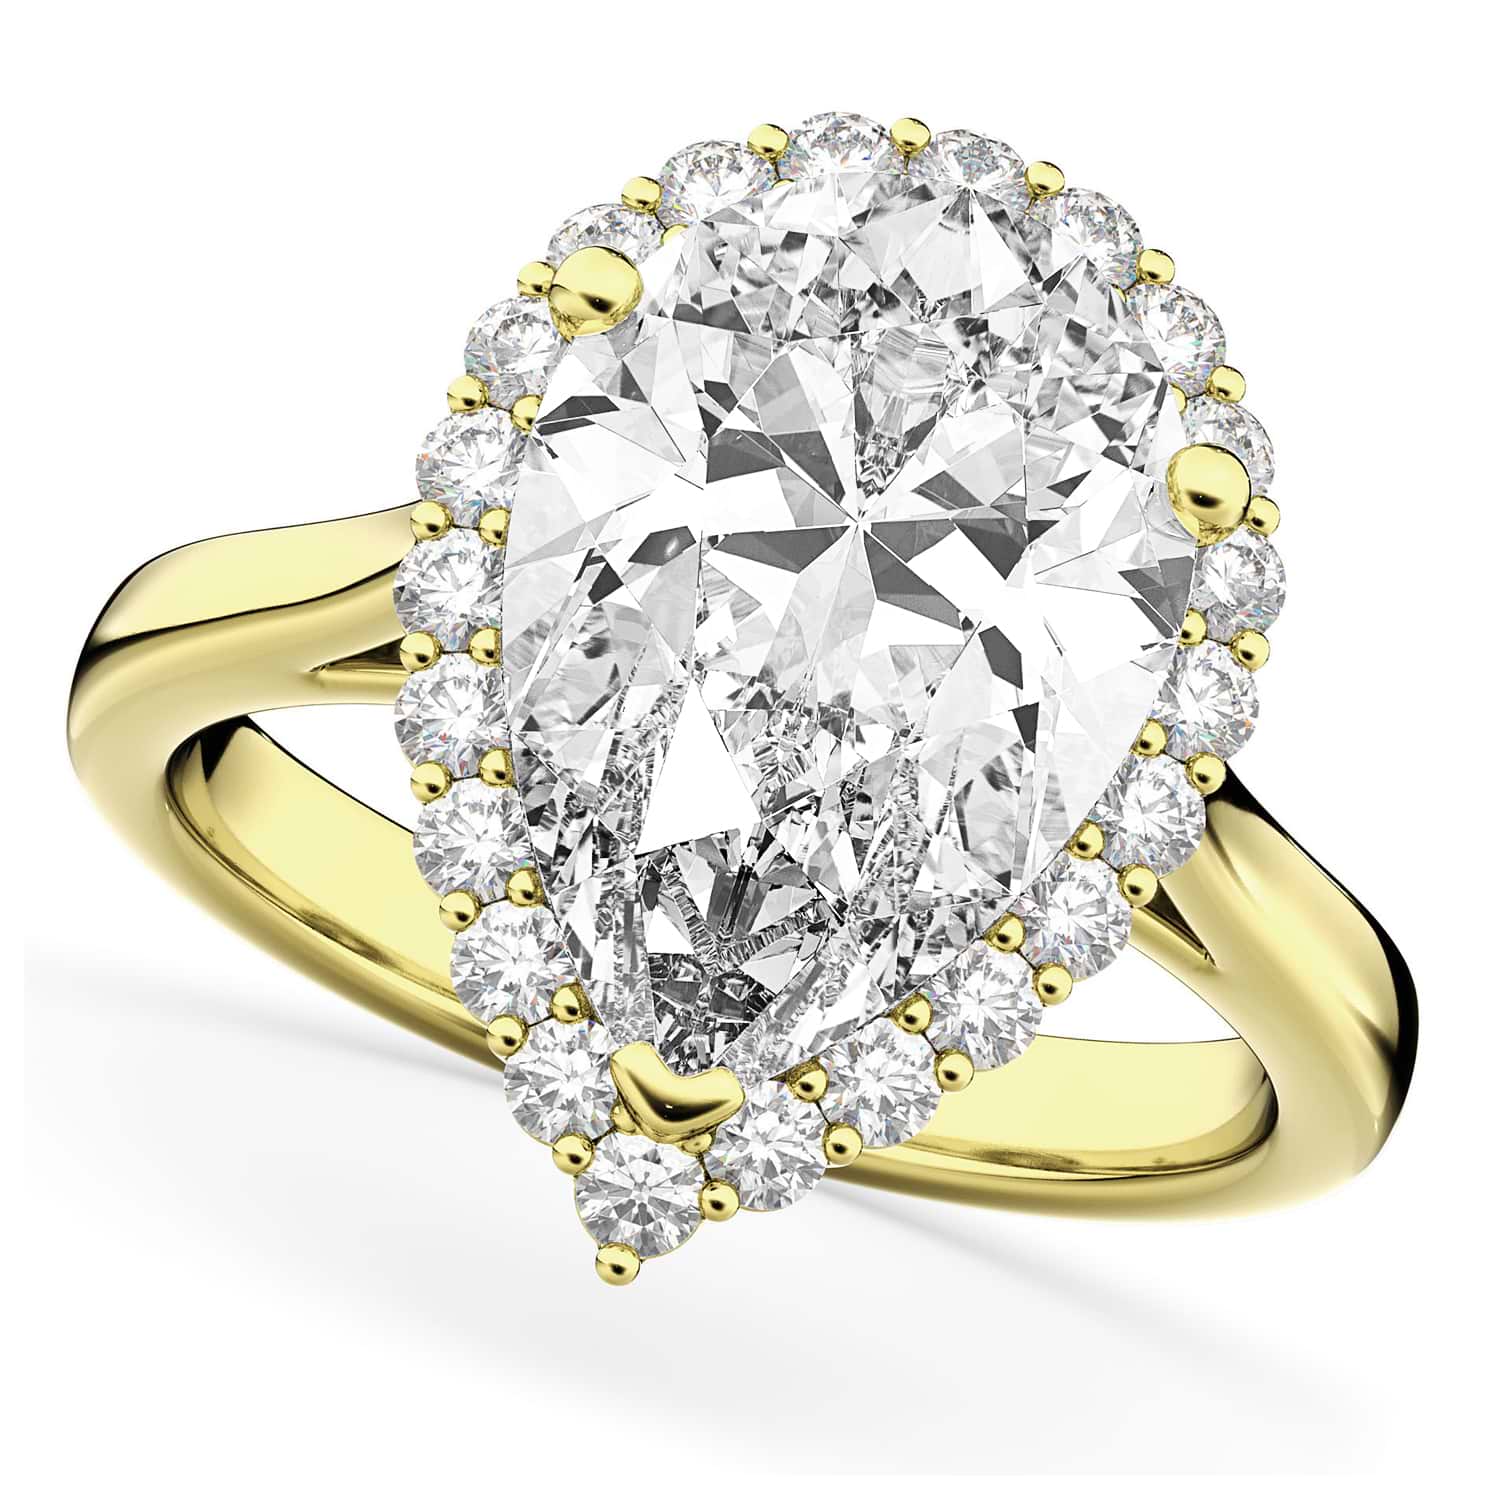 Pear Shaped Halo Diamond Engagement Ring 14K Yellow Gold (4.69ct)